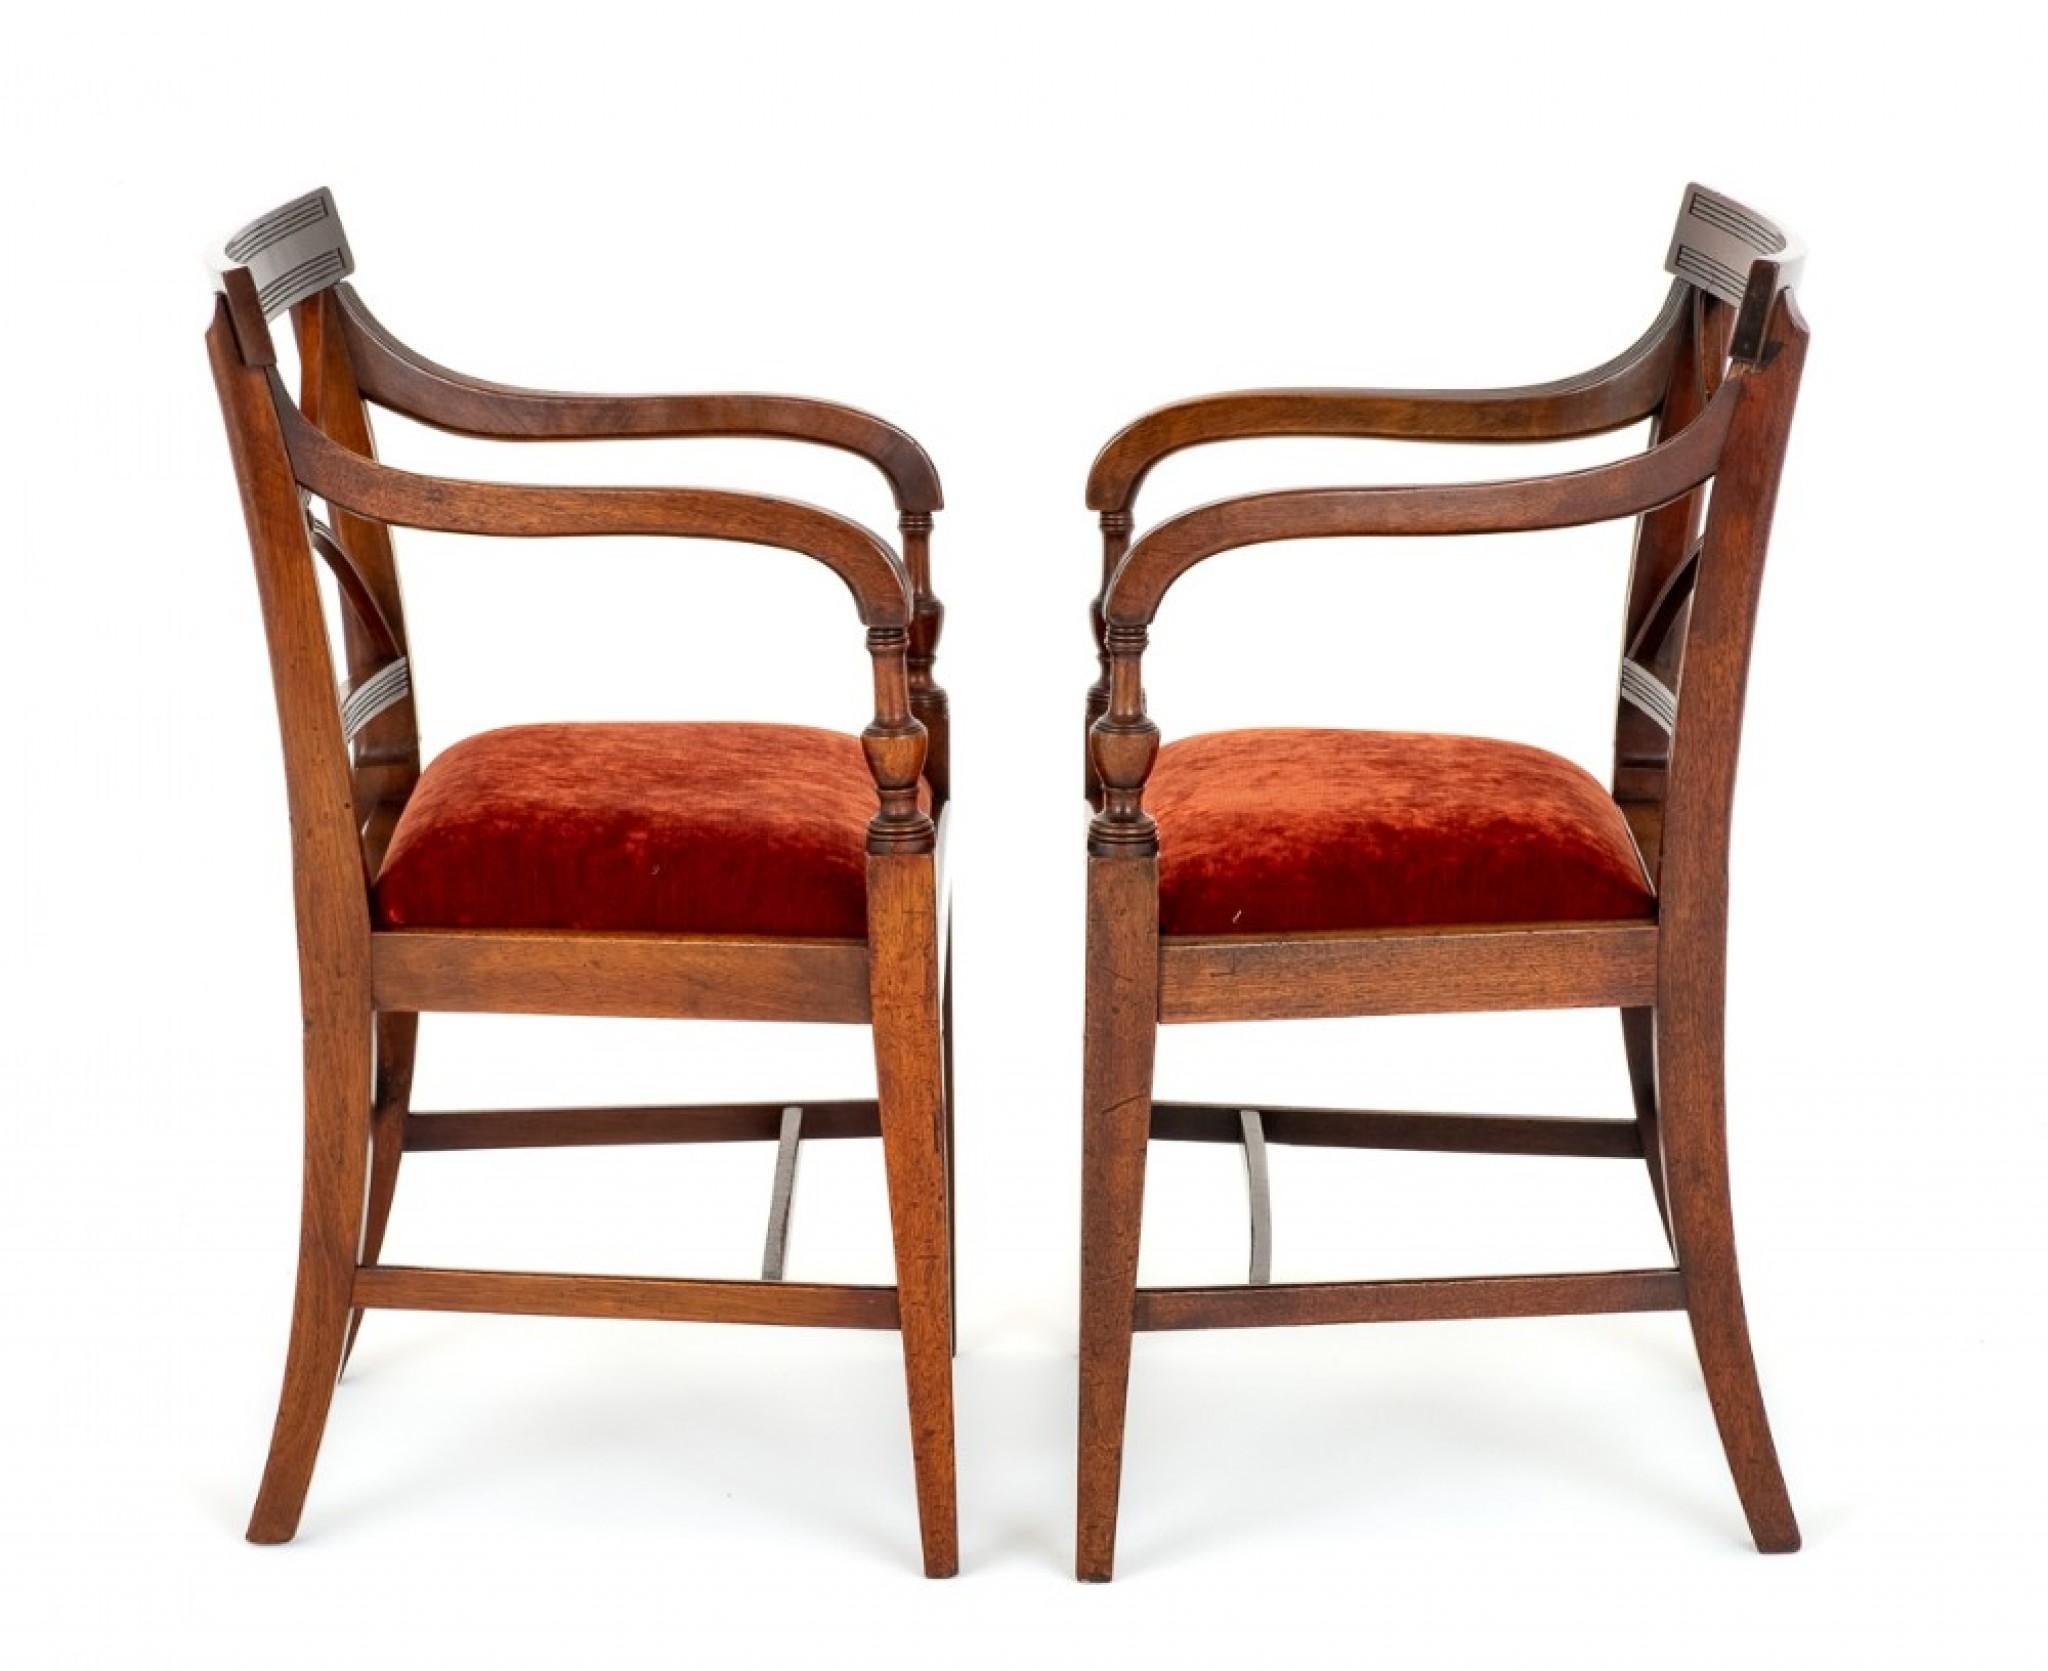 Late 20th Century Pair Regency Arm Chairs Period Mahogany Antique For Sale